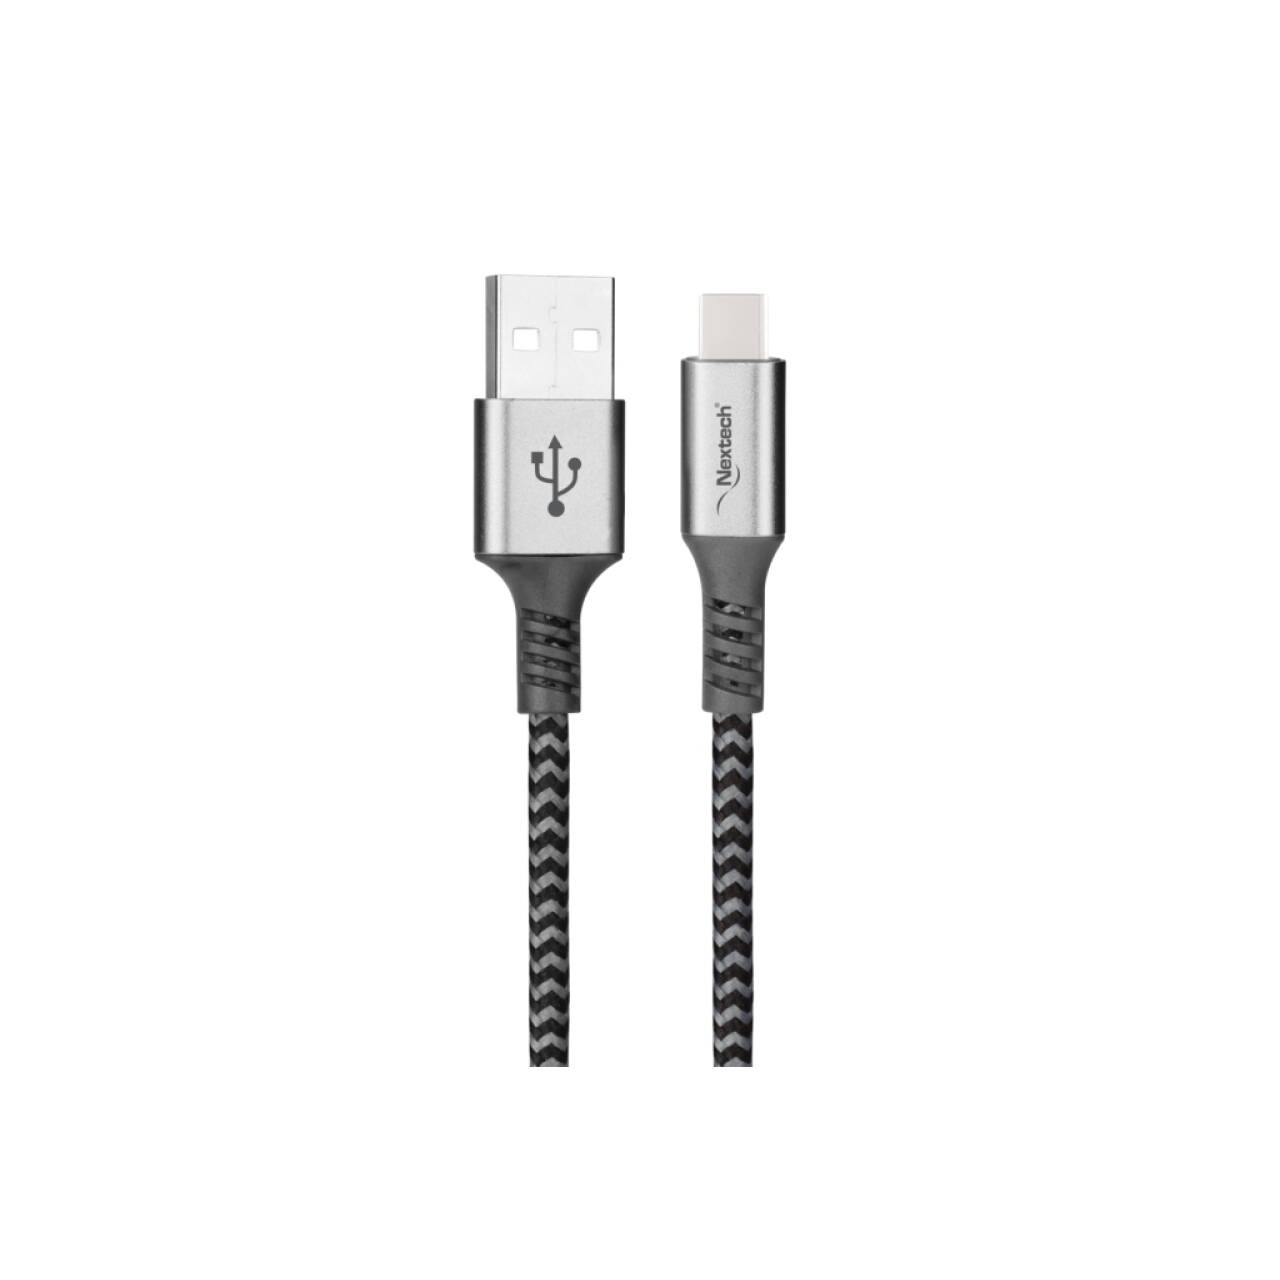 Buy Fast Charging Cable Online